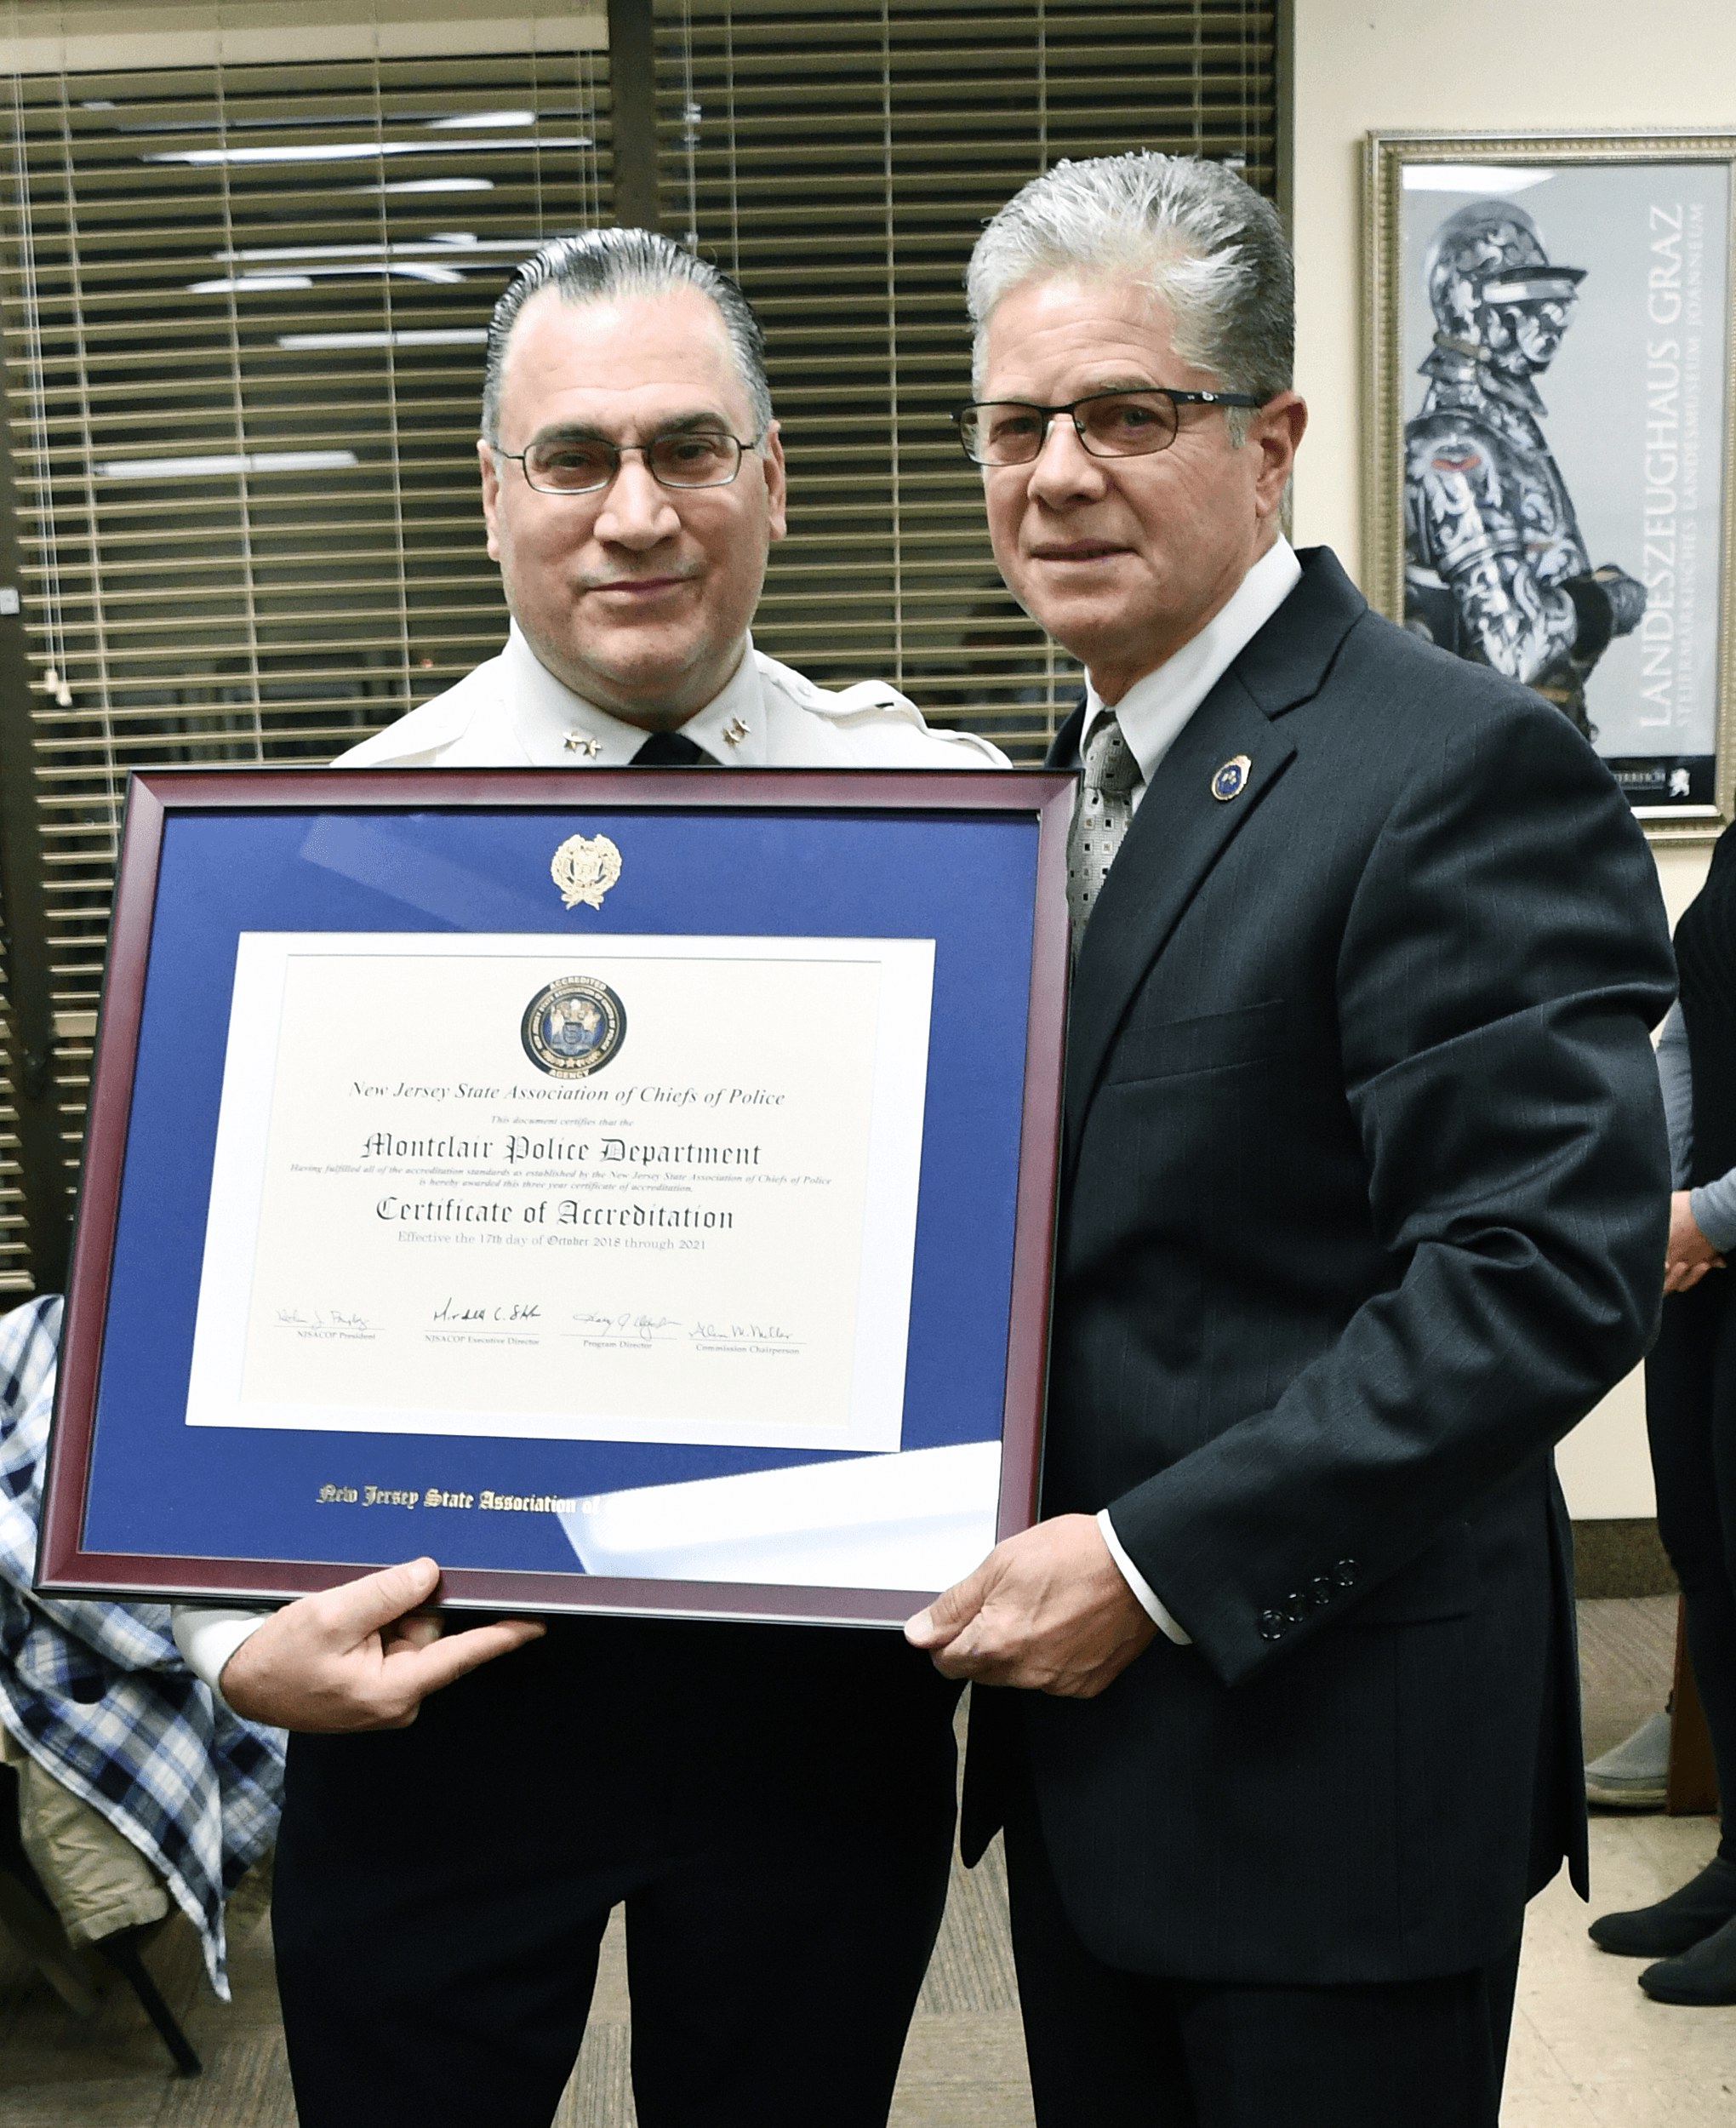 Montclair Police Department receives accreditation